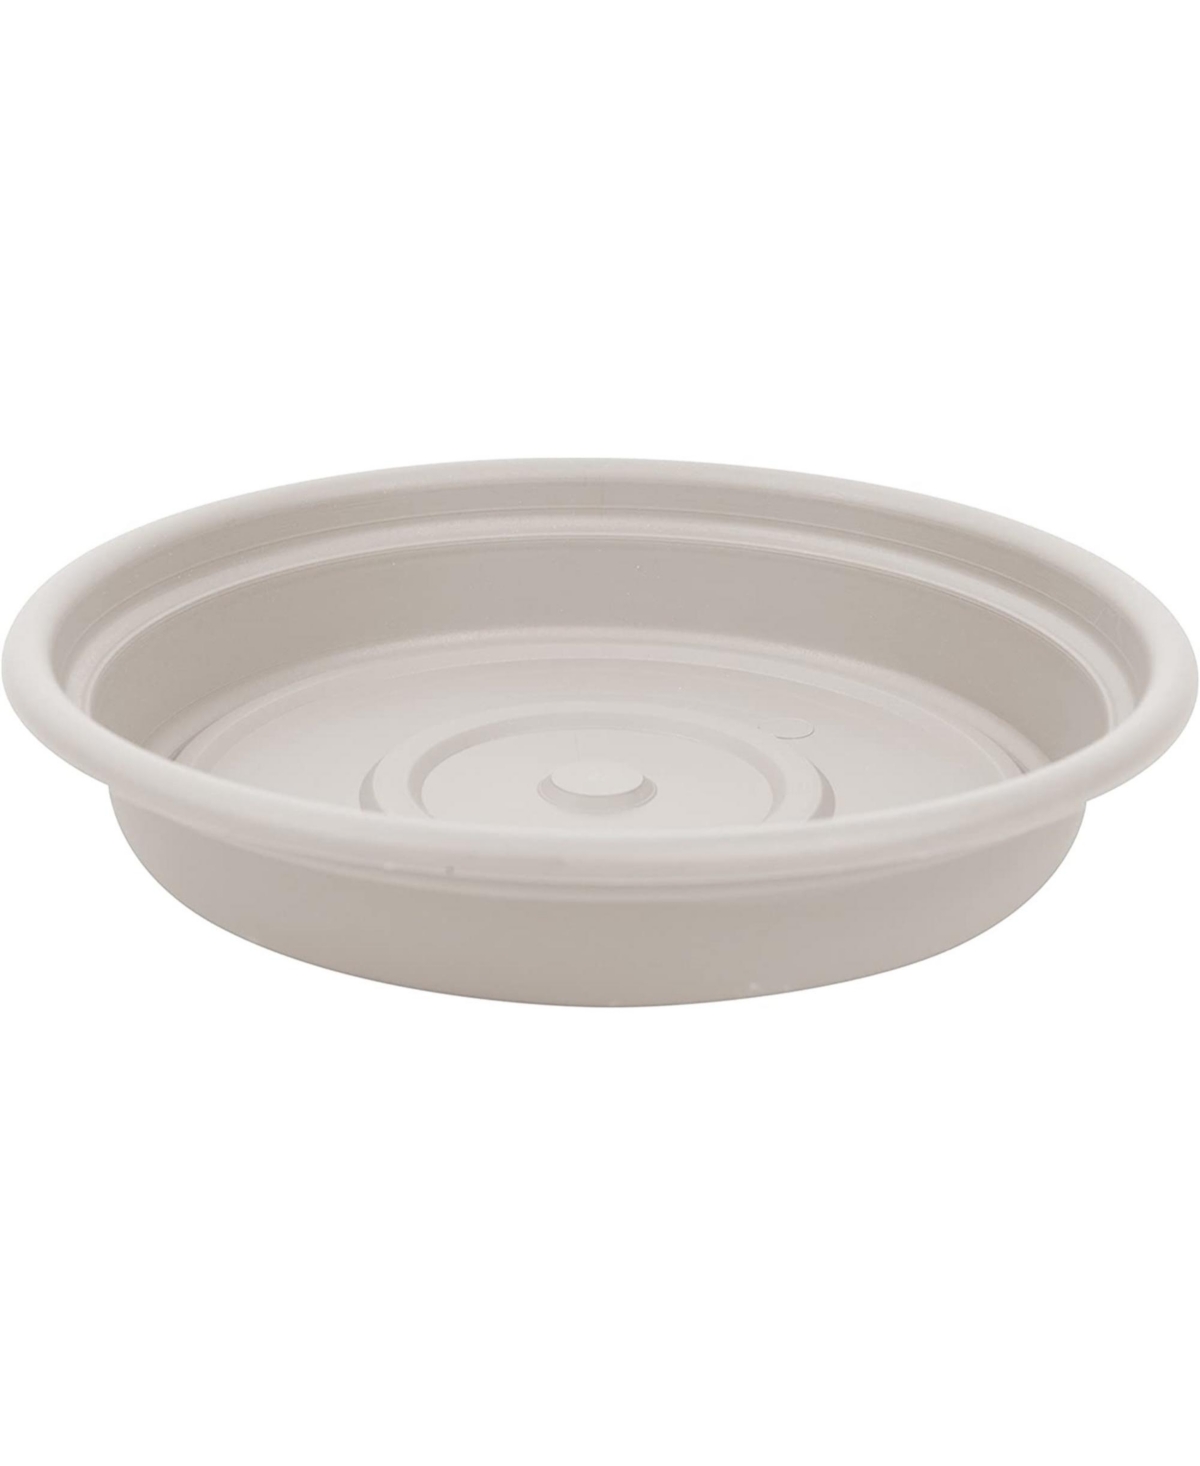 Dura Cotta Plant Saucer Tray, 6in Taupe - Open White